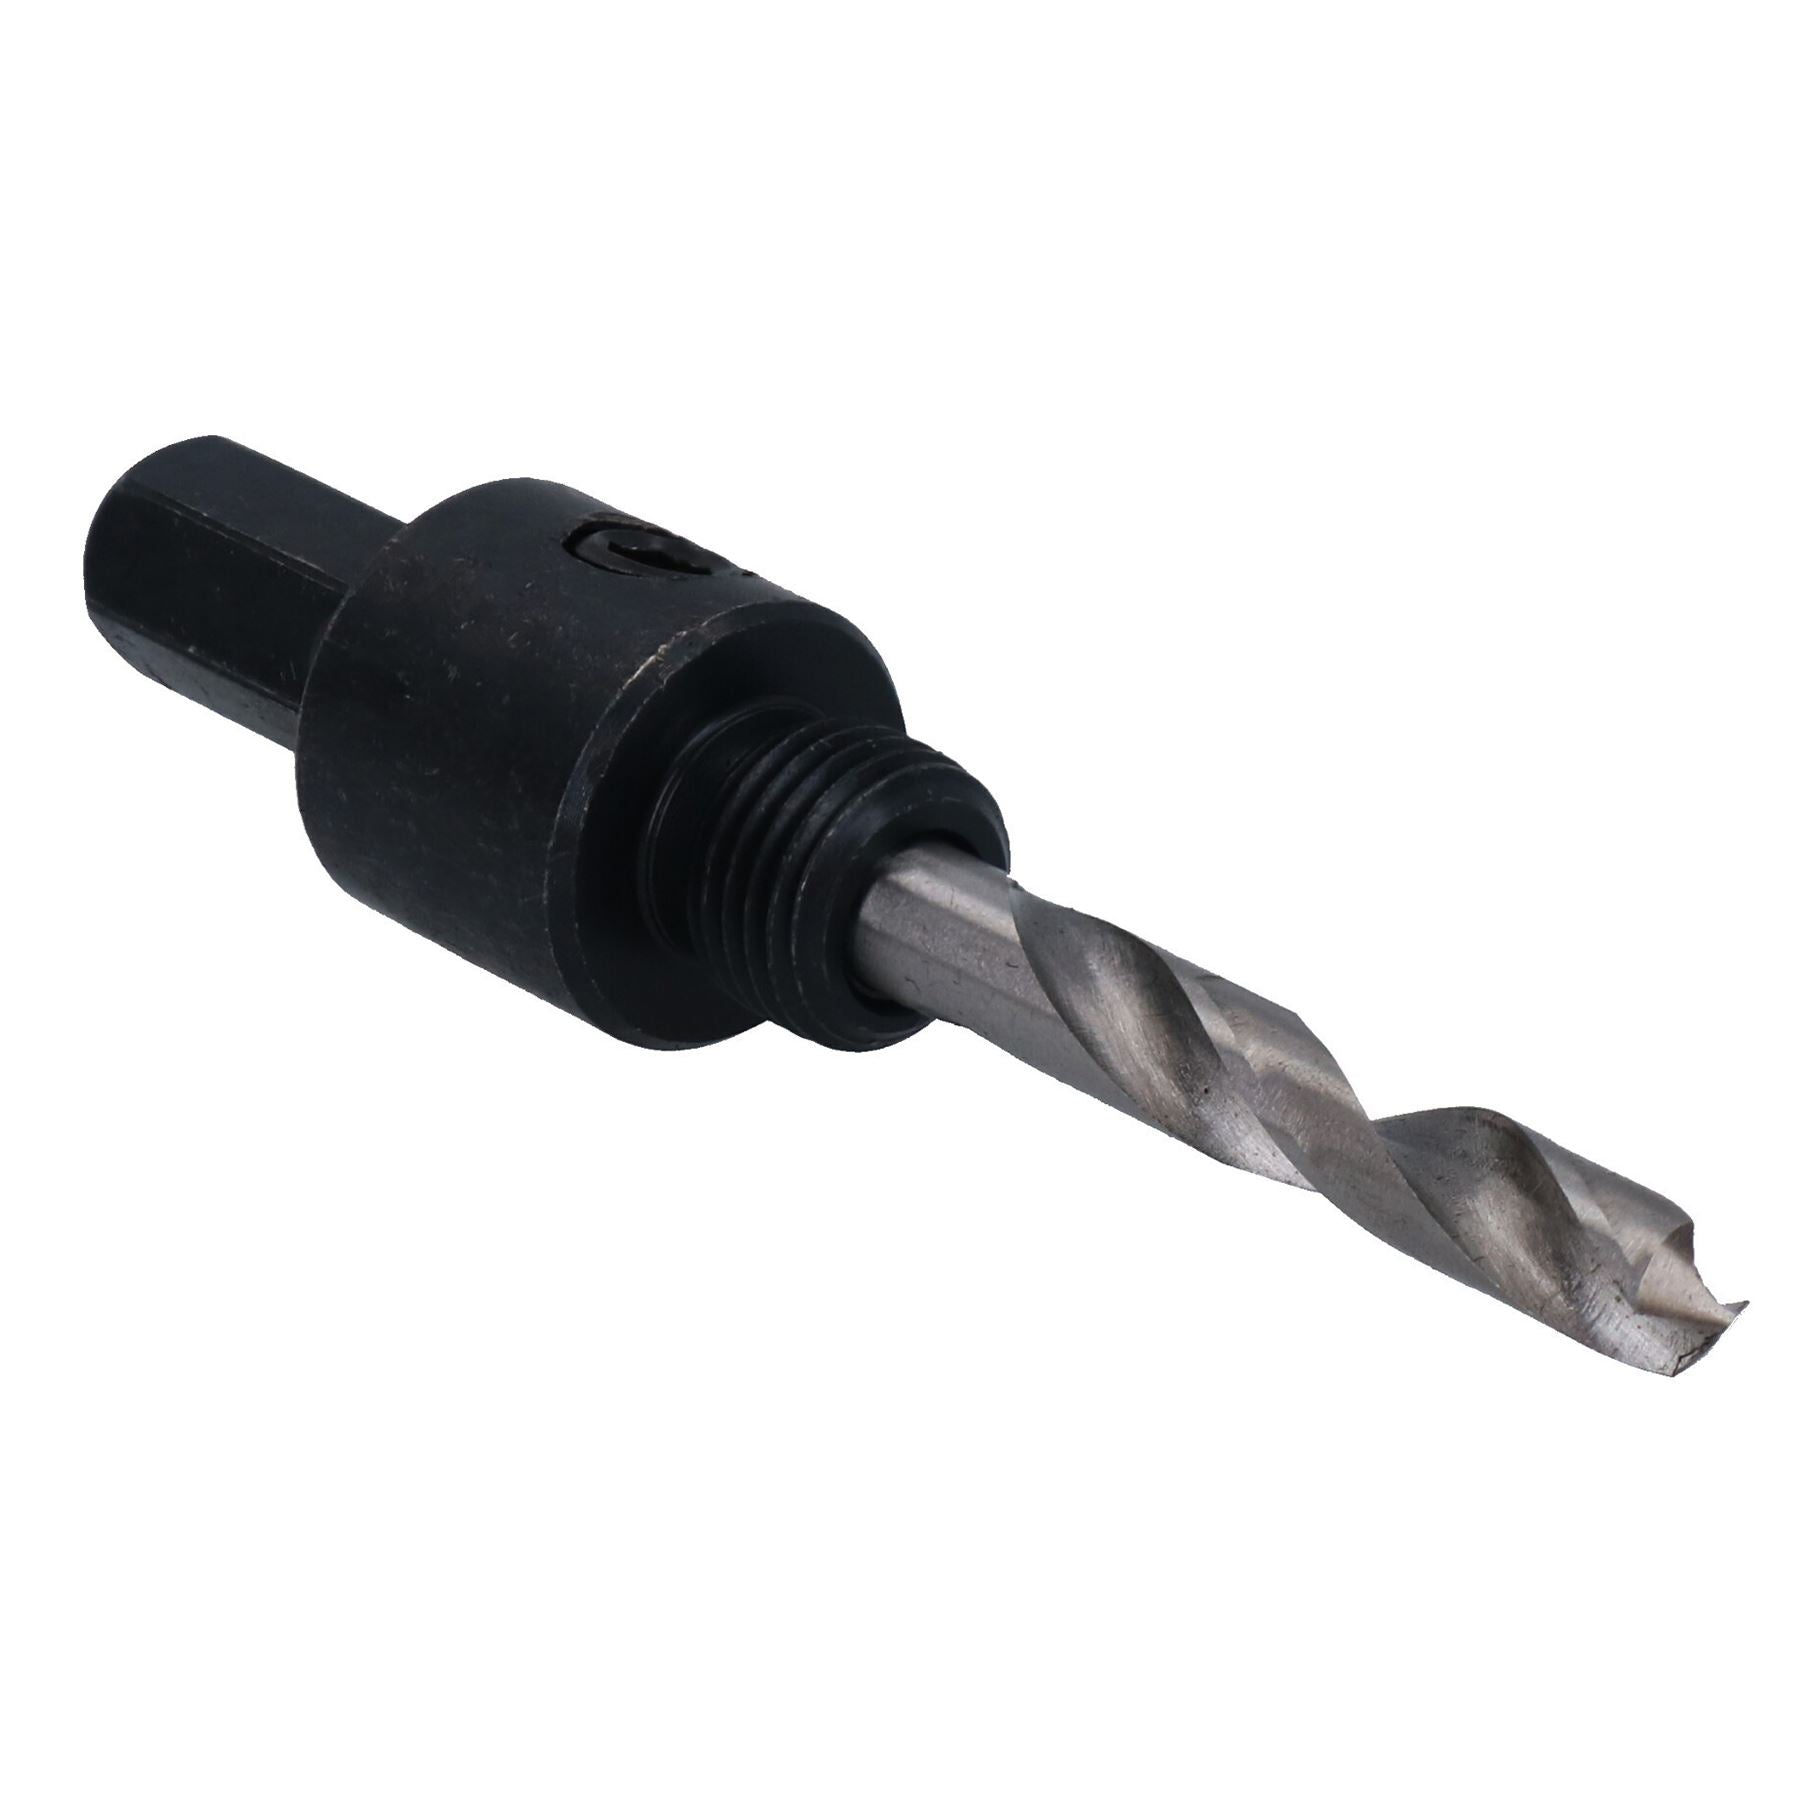 Holesaw Drill Arbor Mandrill Attachment For Hole Saw Cutters 14mm - 32mm